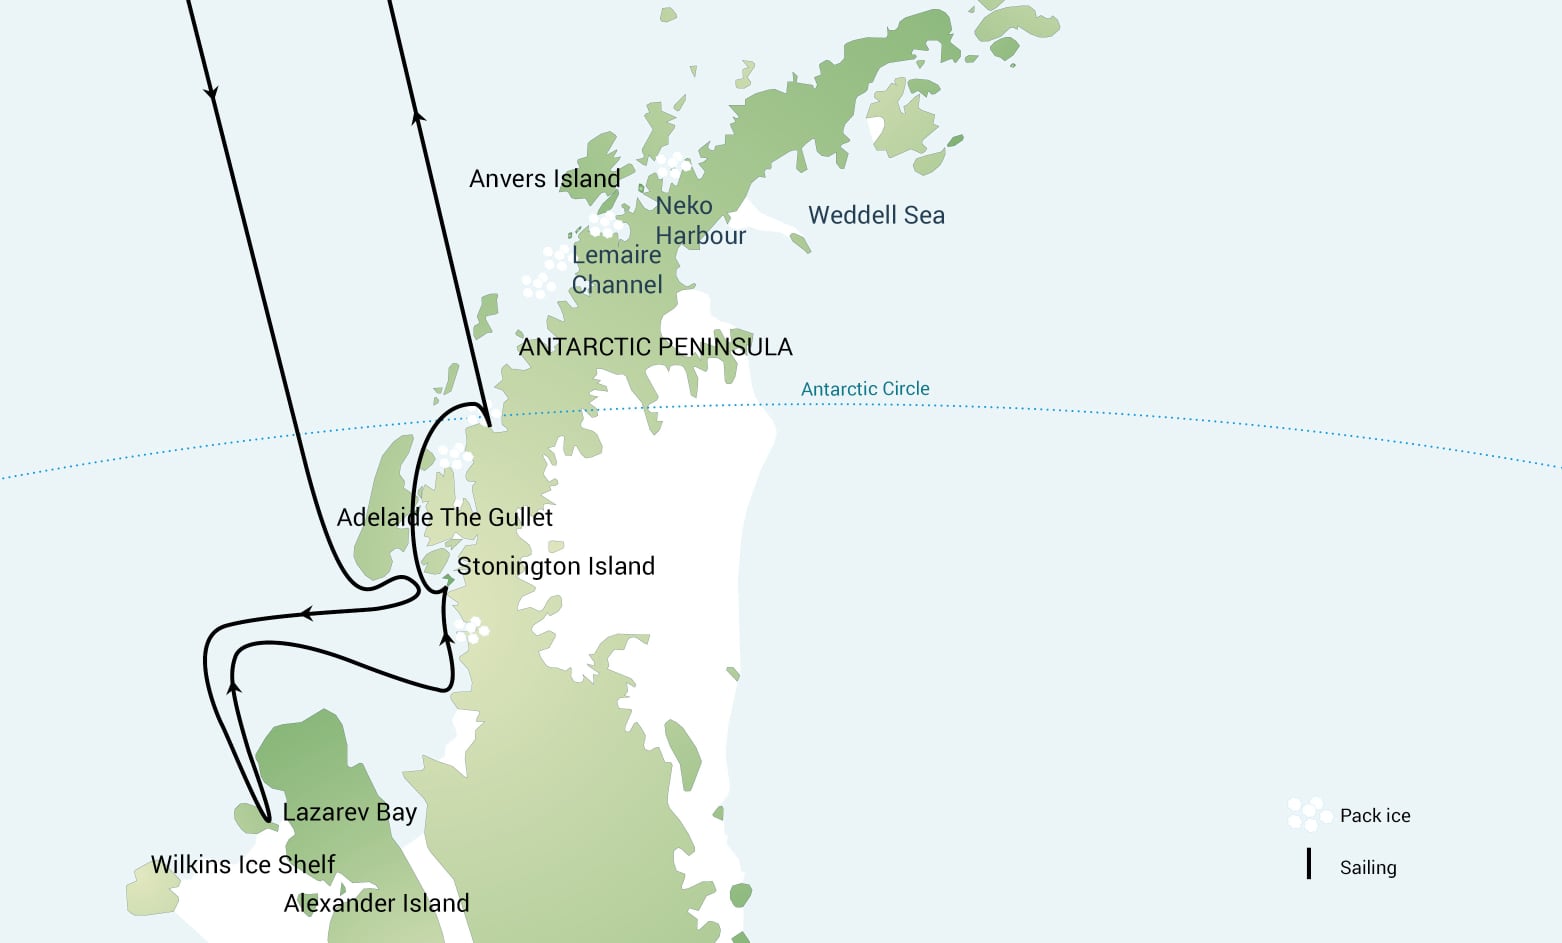 Beyond the Antarctic Circle - Wilkins Ice Shelf route map